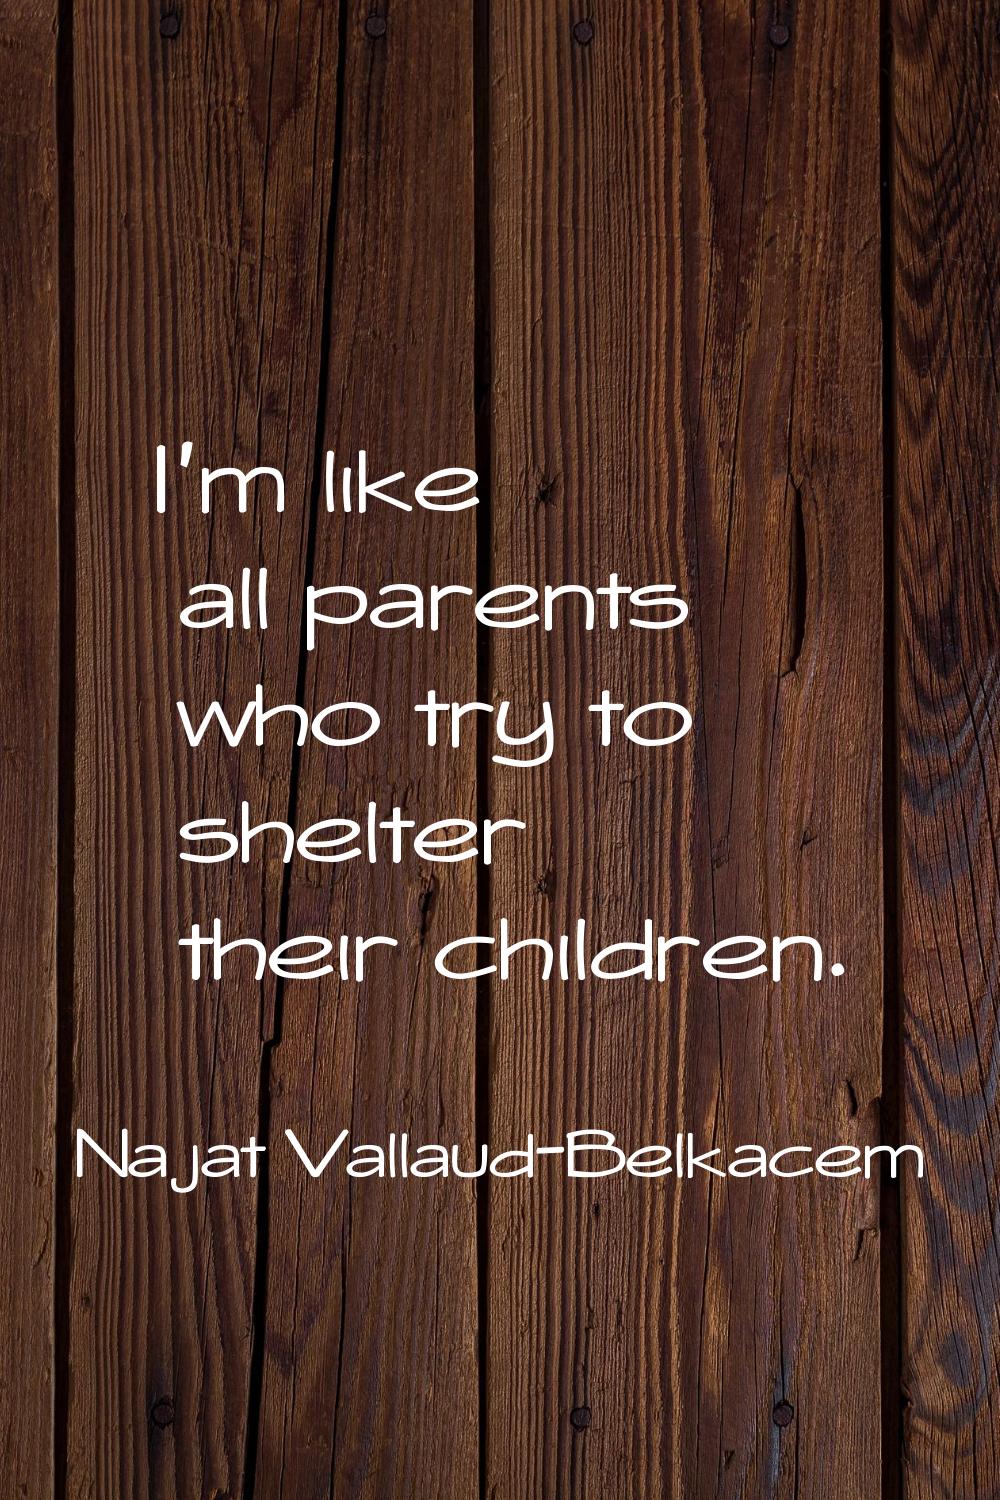 I'm like all parents who try to shelter their children.